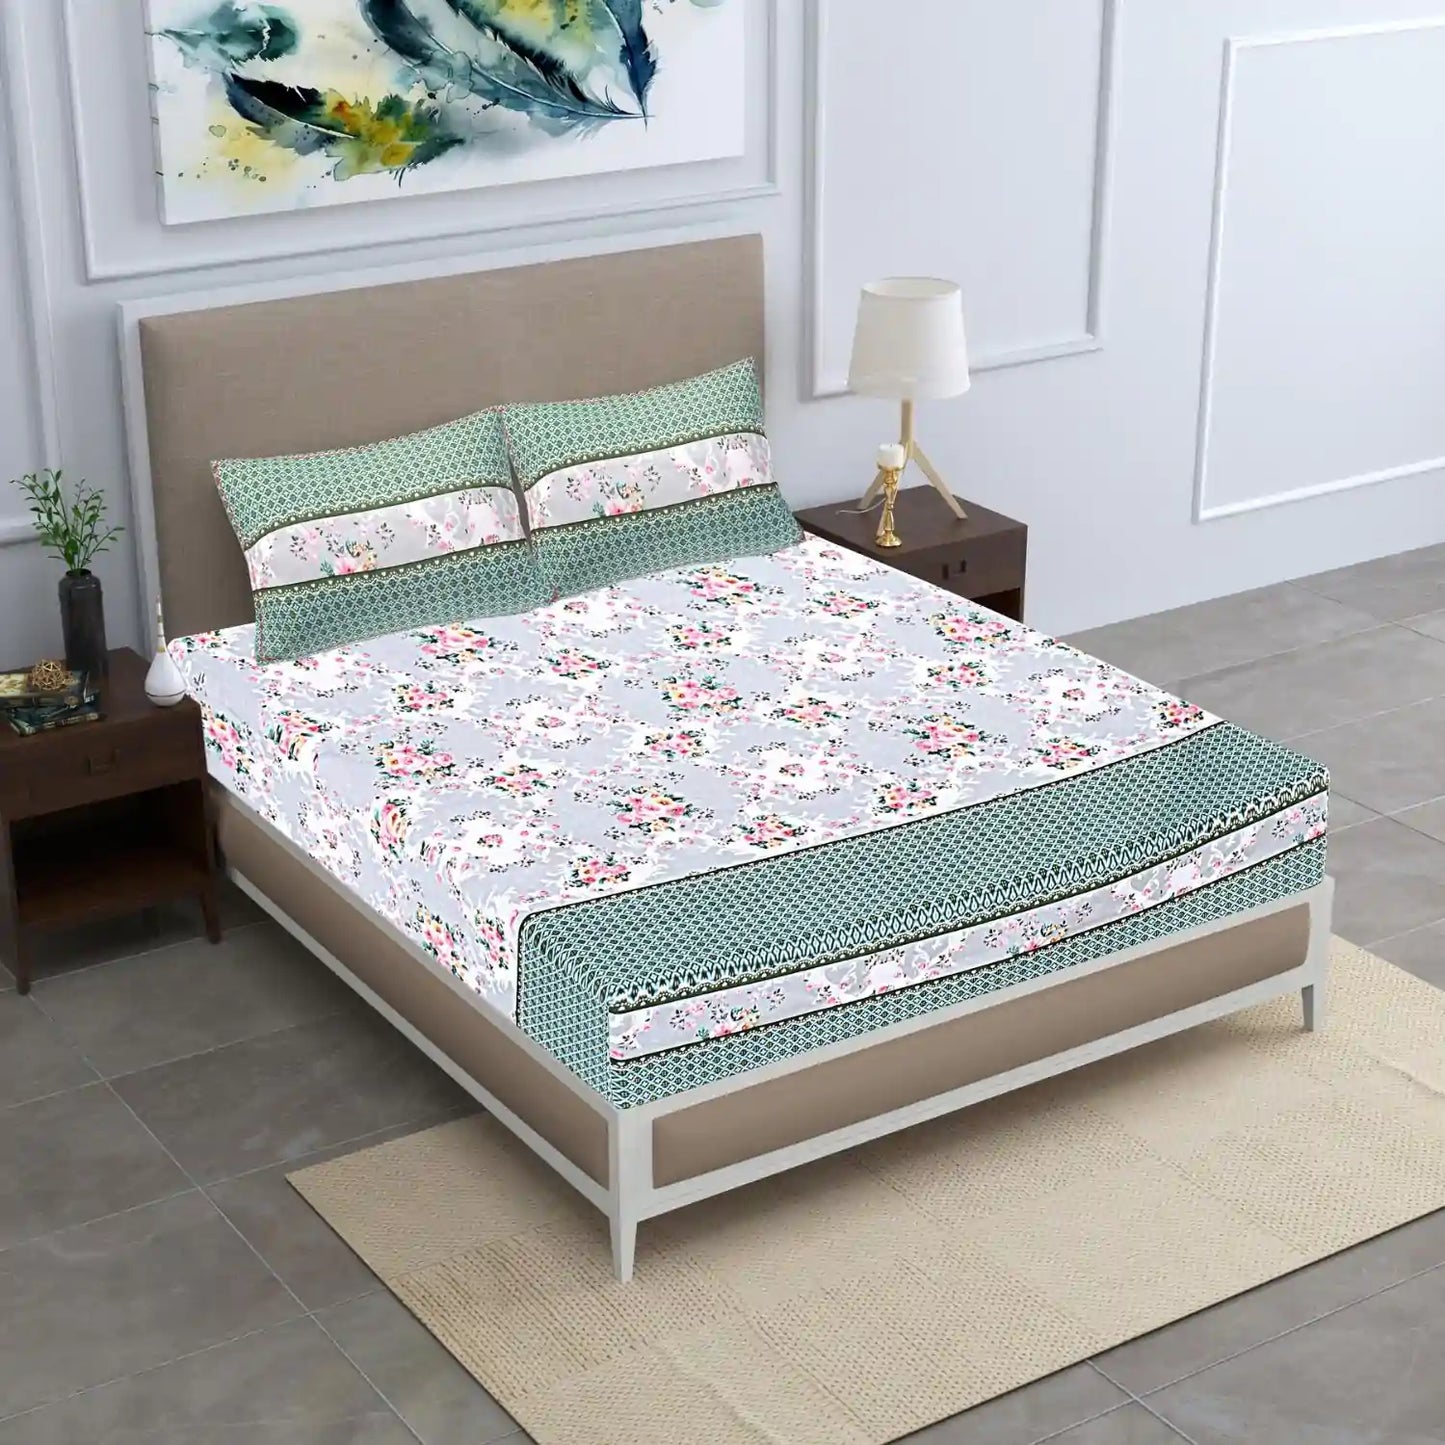 The Evergreen Double Bed Bedsheet